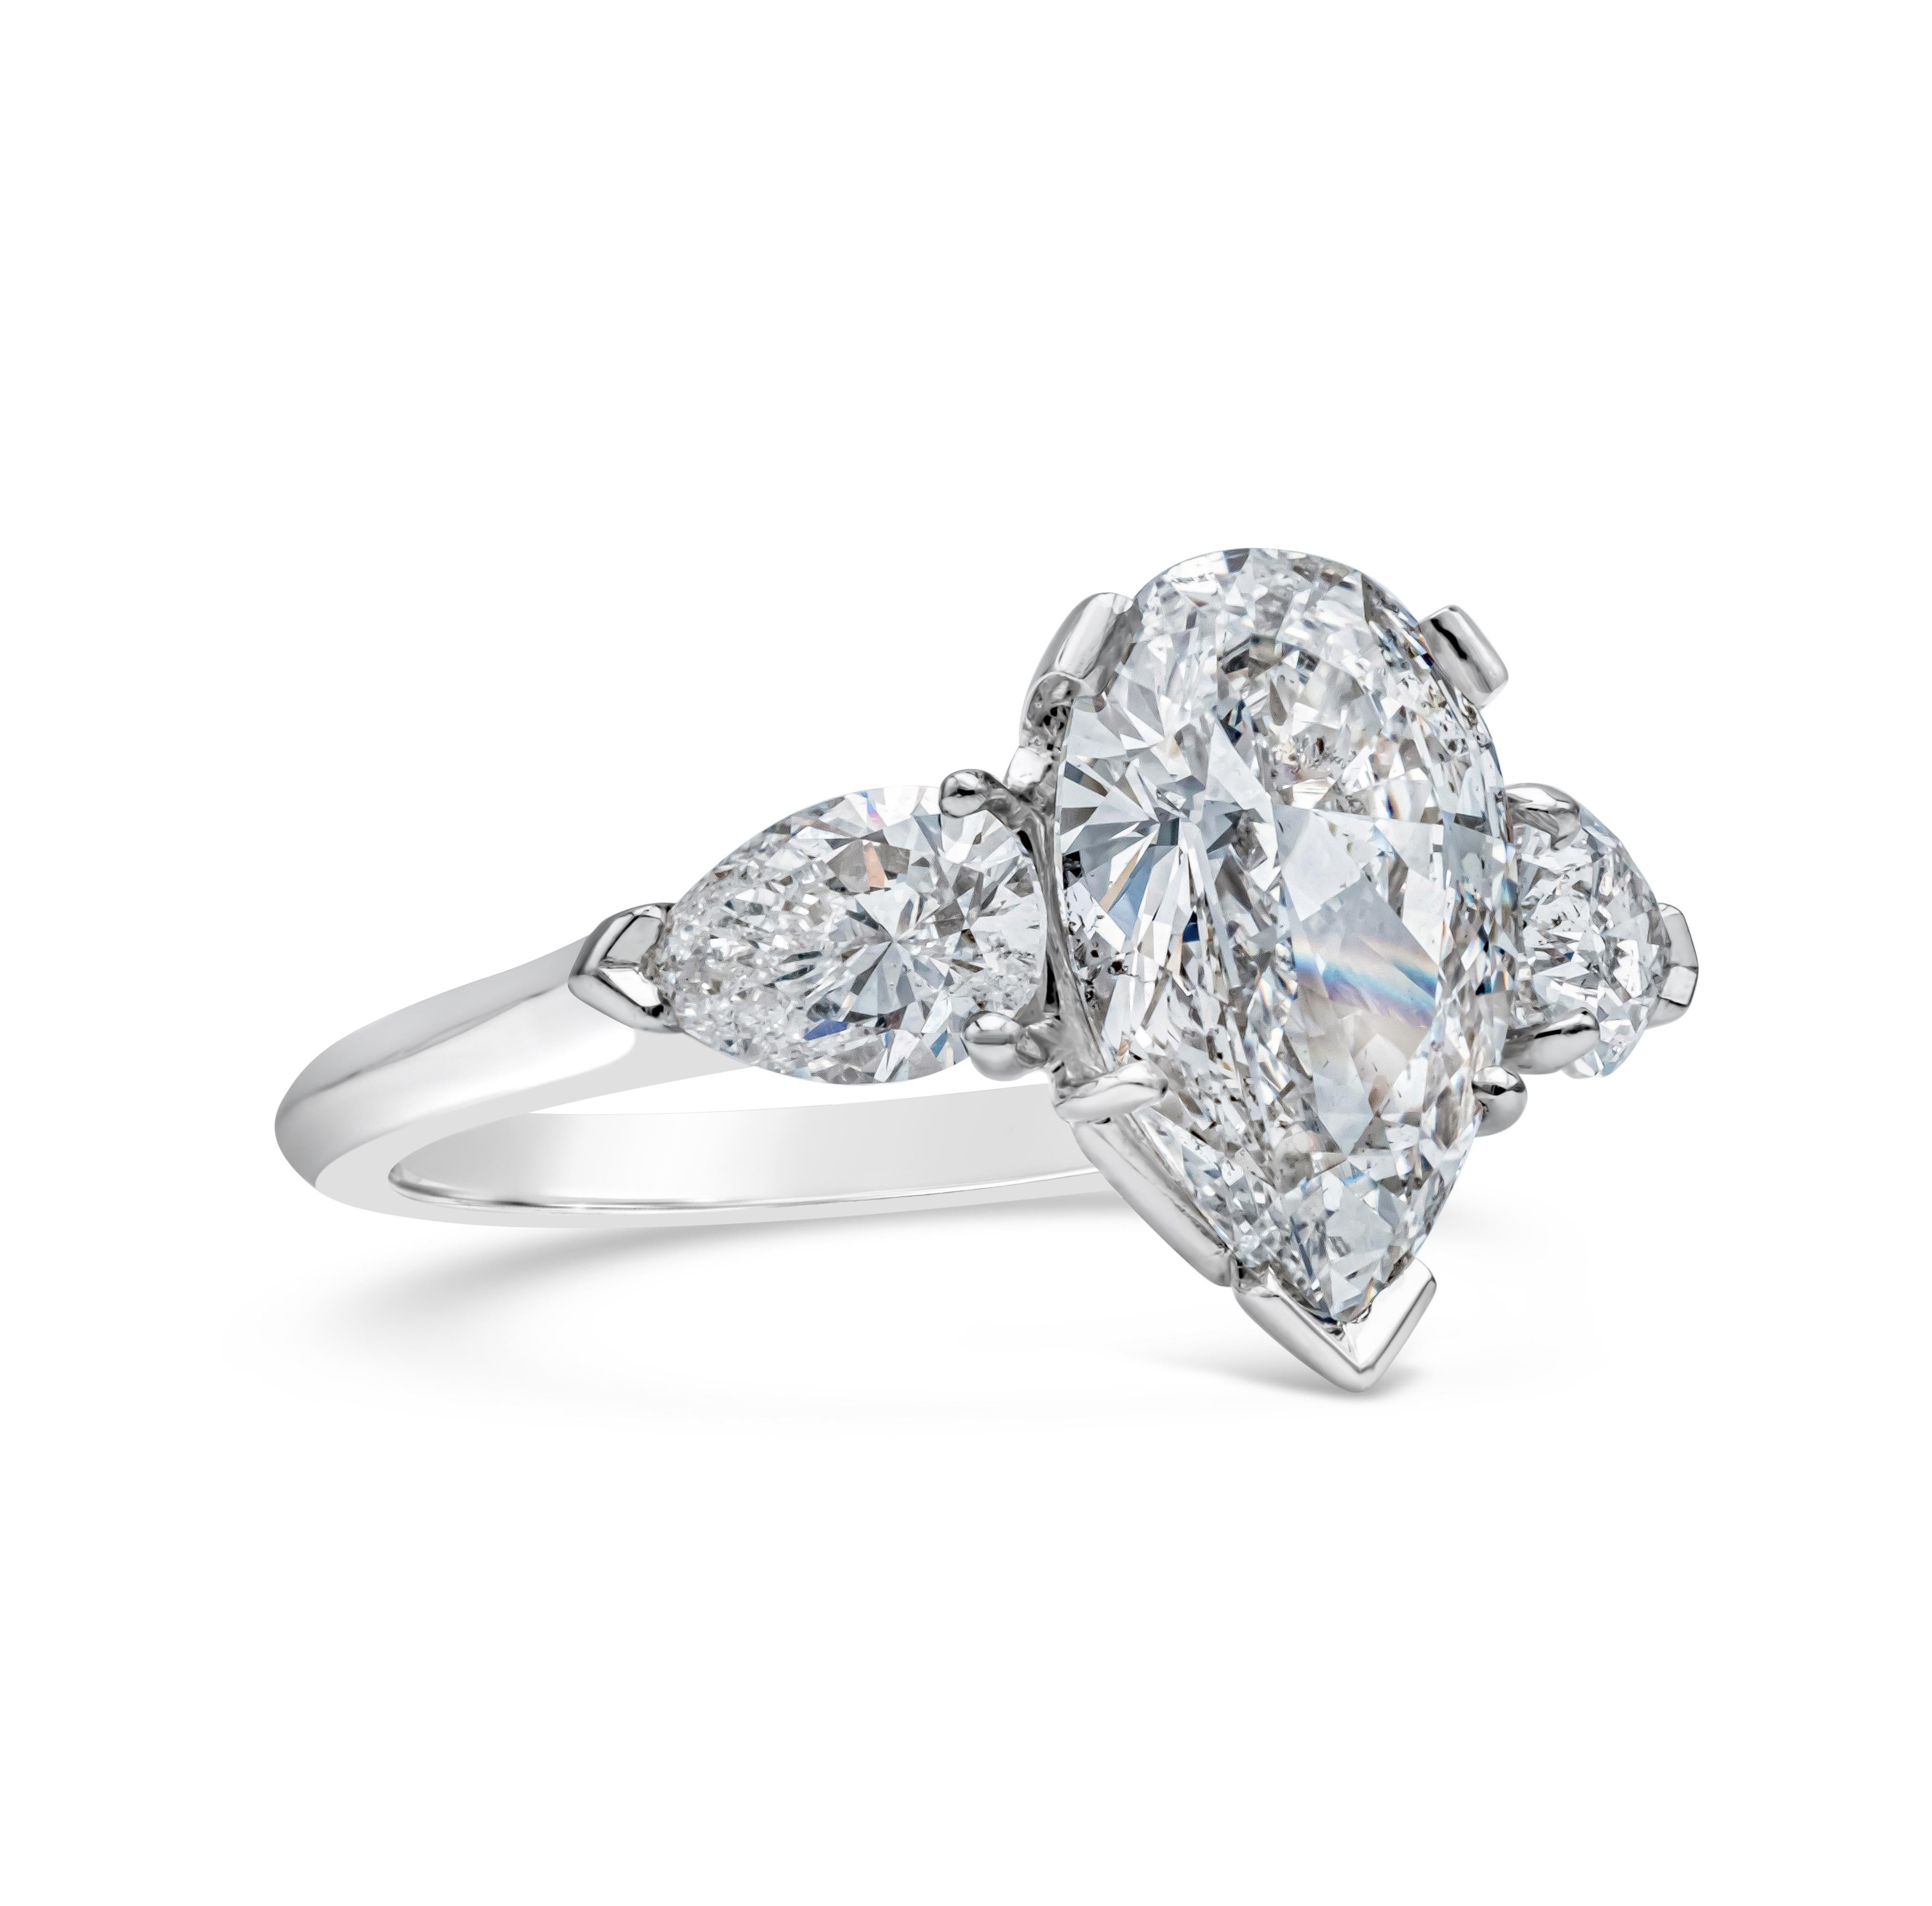 A chic three-stone engagement ring style, showcasing a 1.88 carats pear shape diamond certified by GIA as F color and SI2 clarity, set on a five prong setting. Flanked by two melee pear shape diamonds weighing 0.91 carat total. Set on a polished